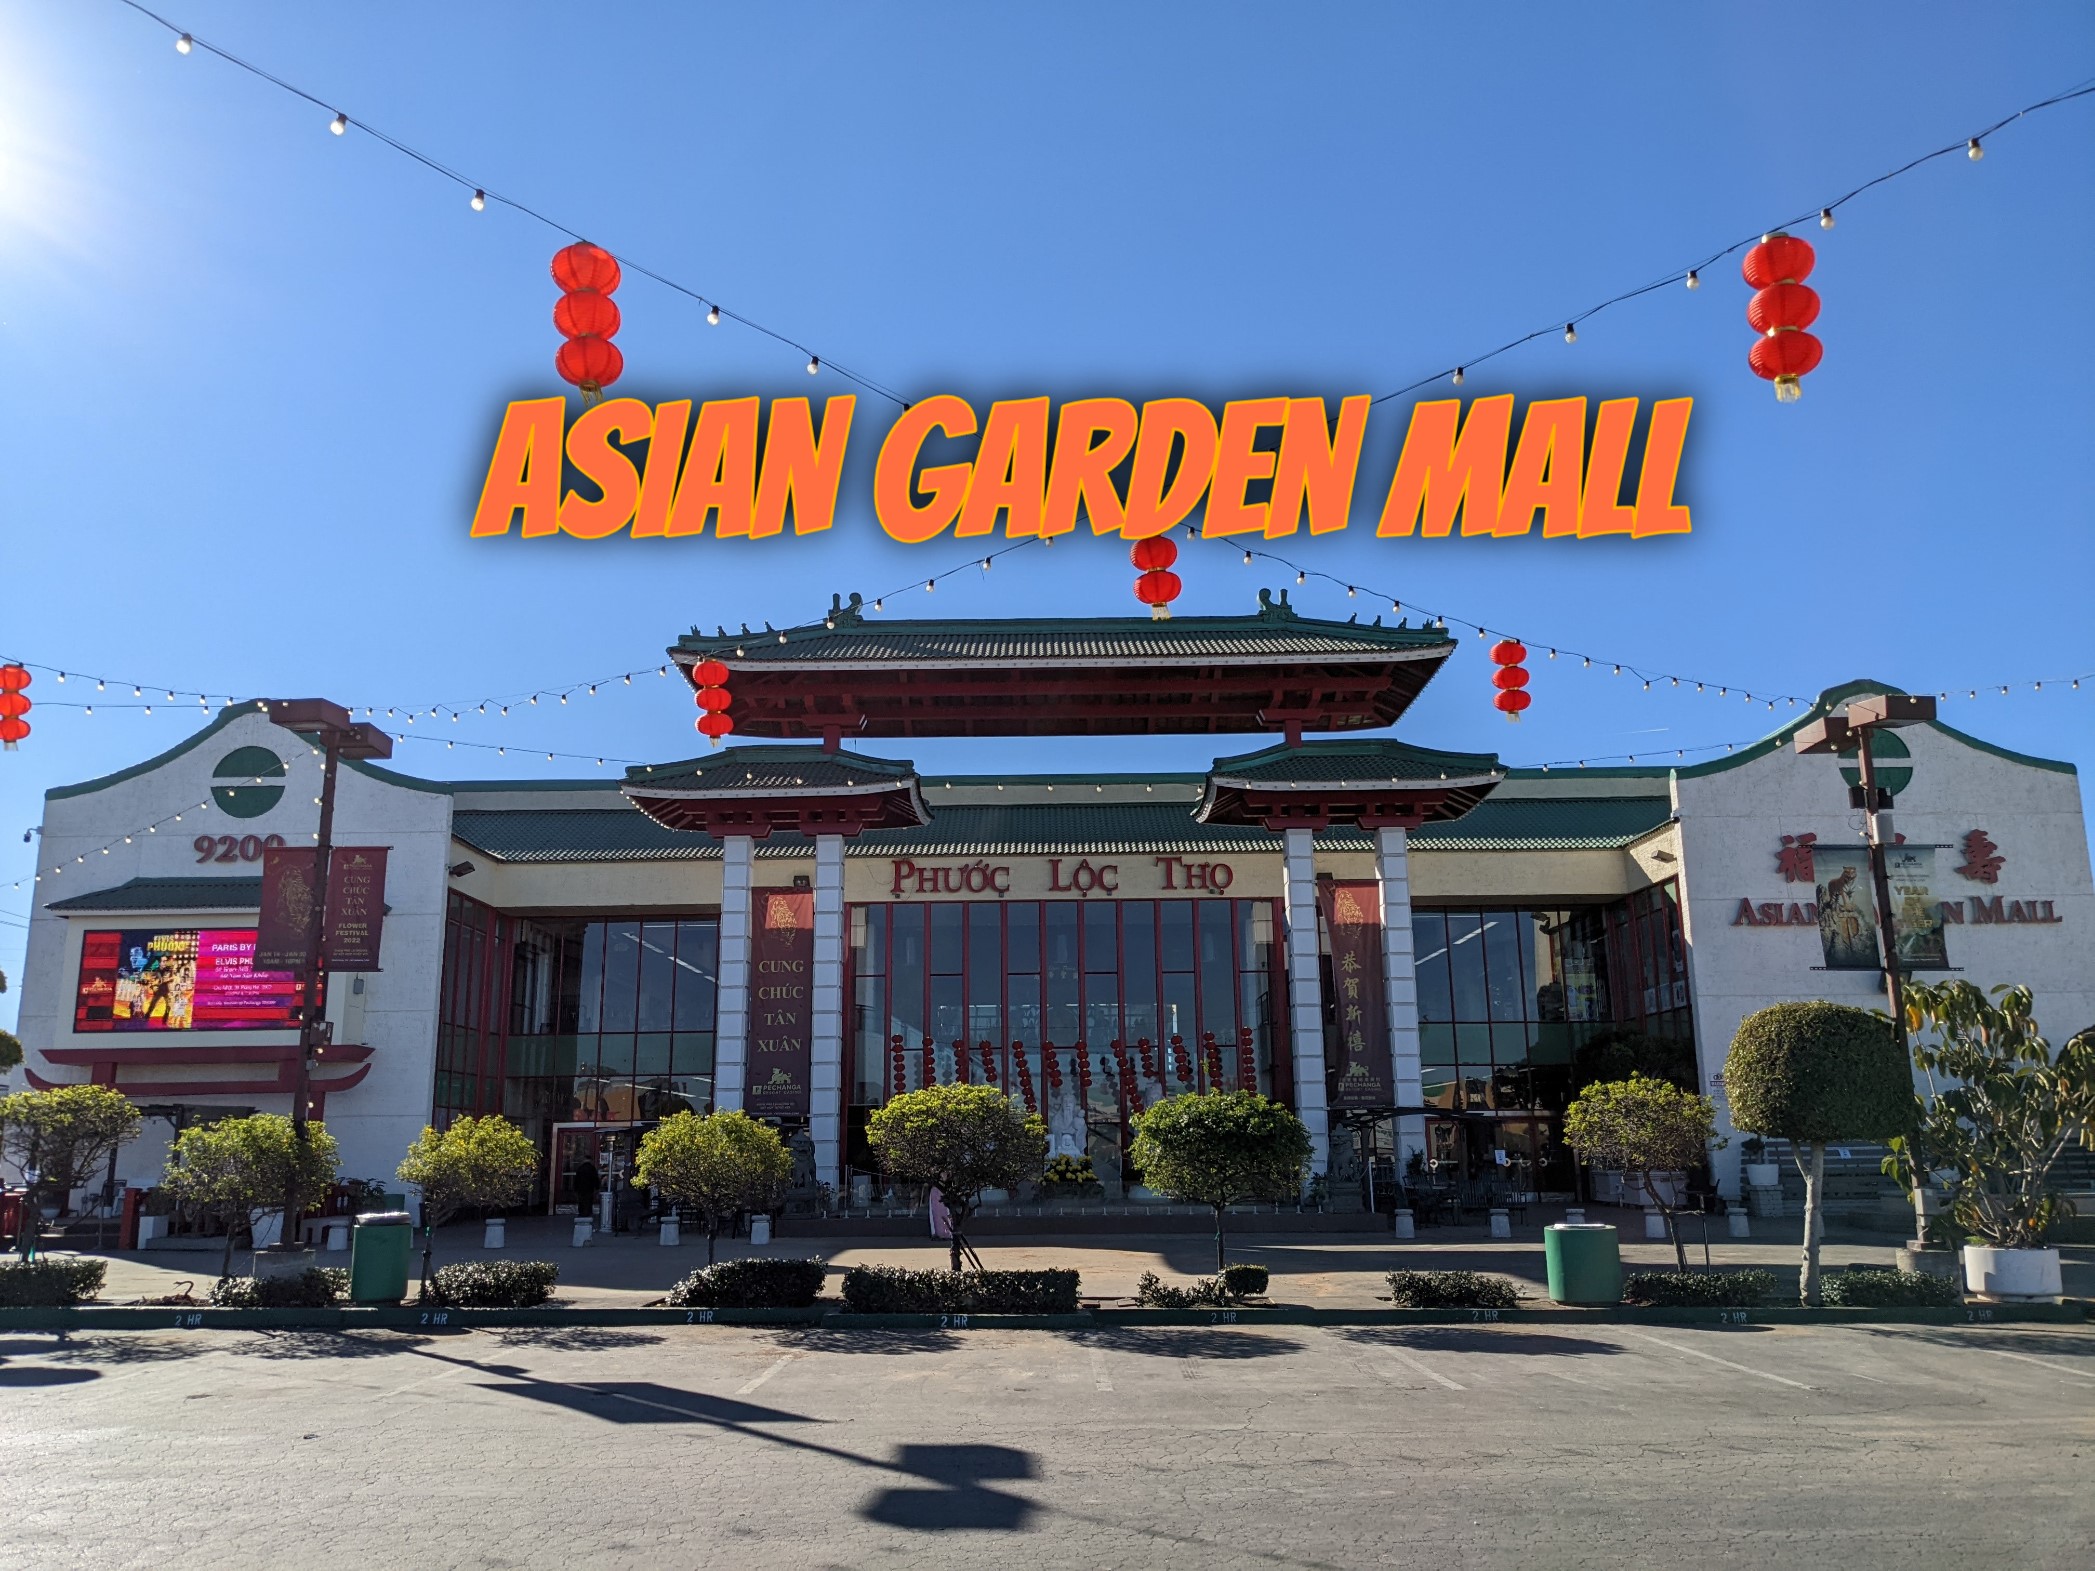 The Best Popular Asian Garden Mall: A Food and Shopping Haven in Little Saigon